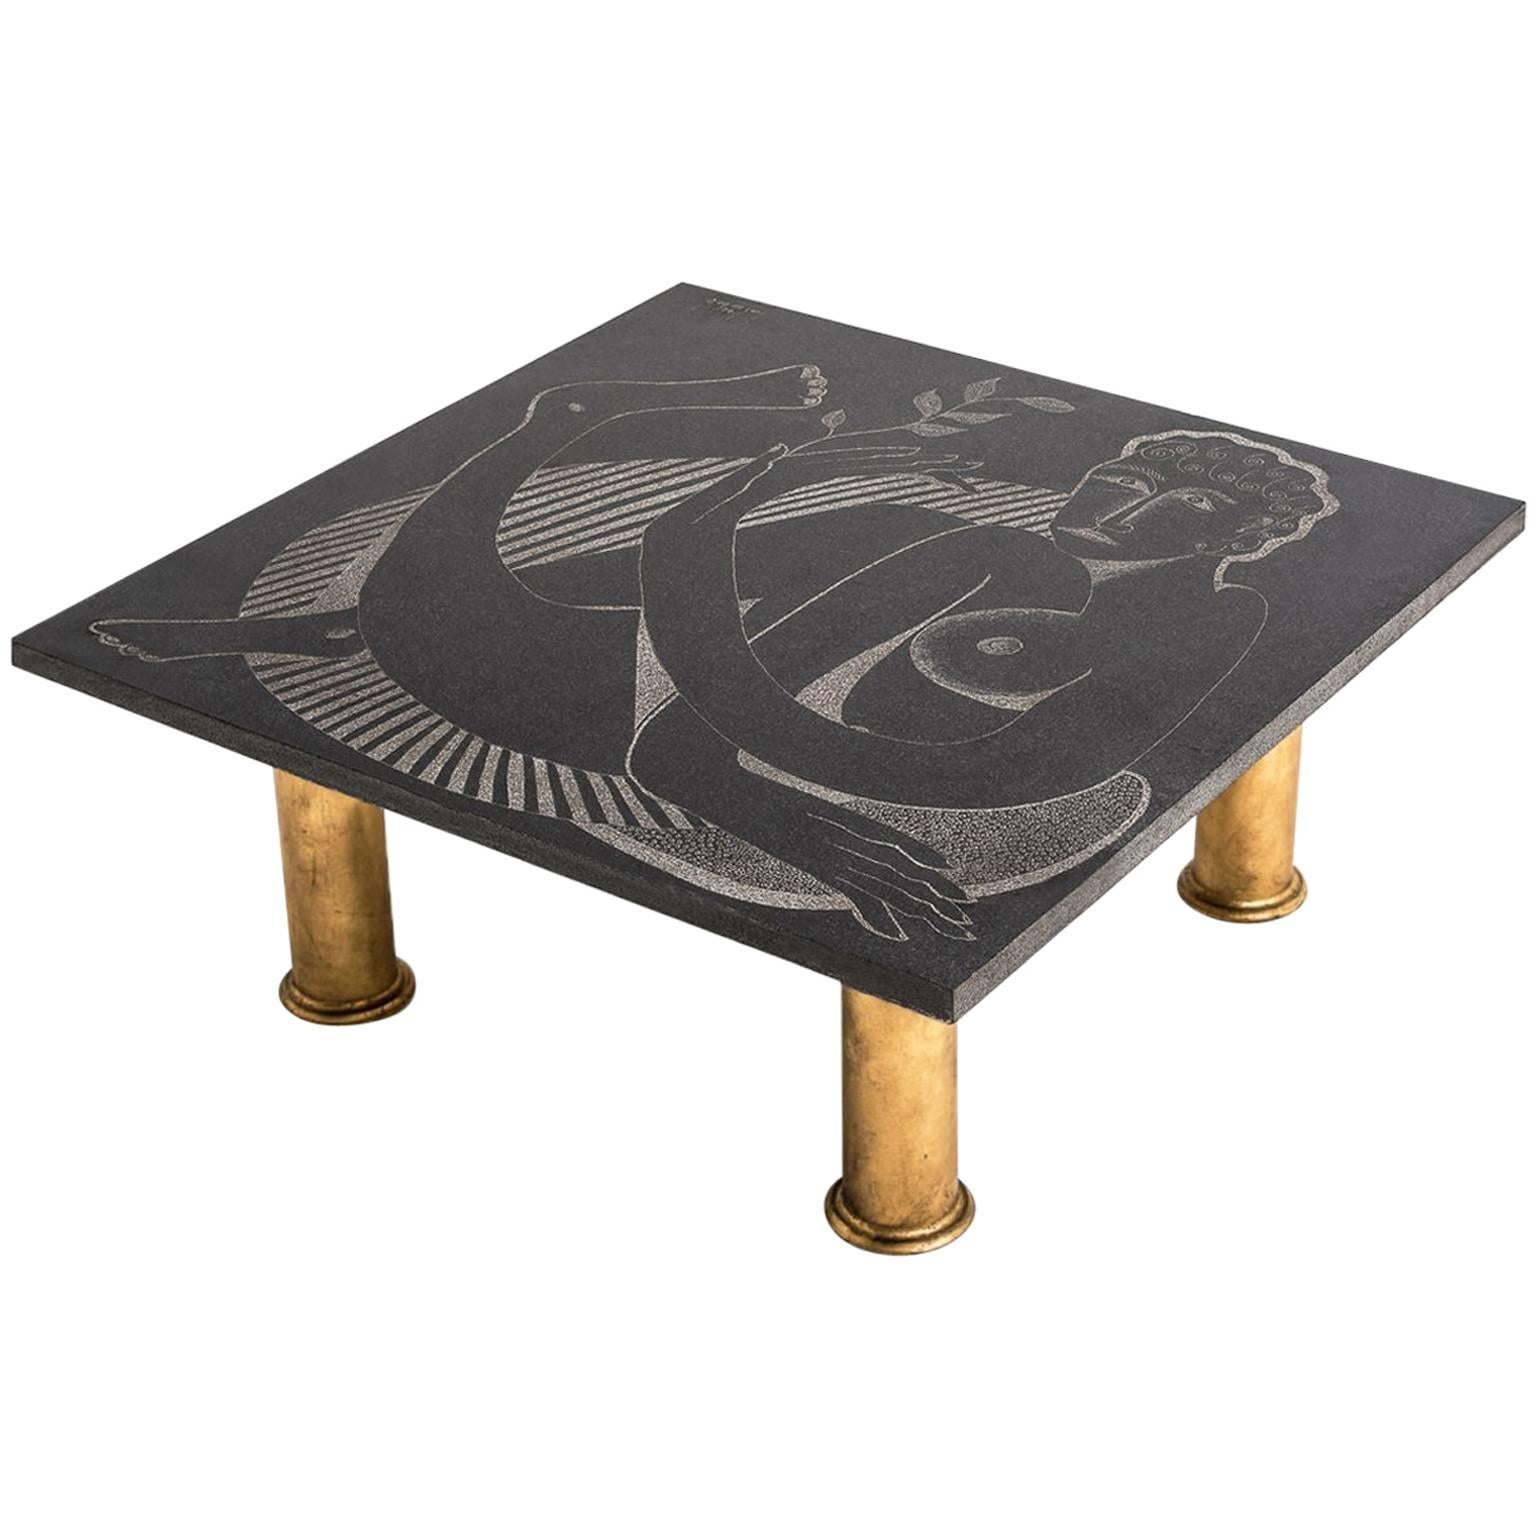 Artistic Engraved Black Granite and Gild Midcentury Coffee Table by Guy de Jong